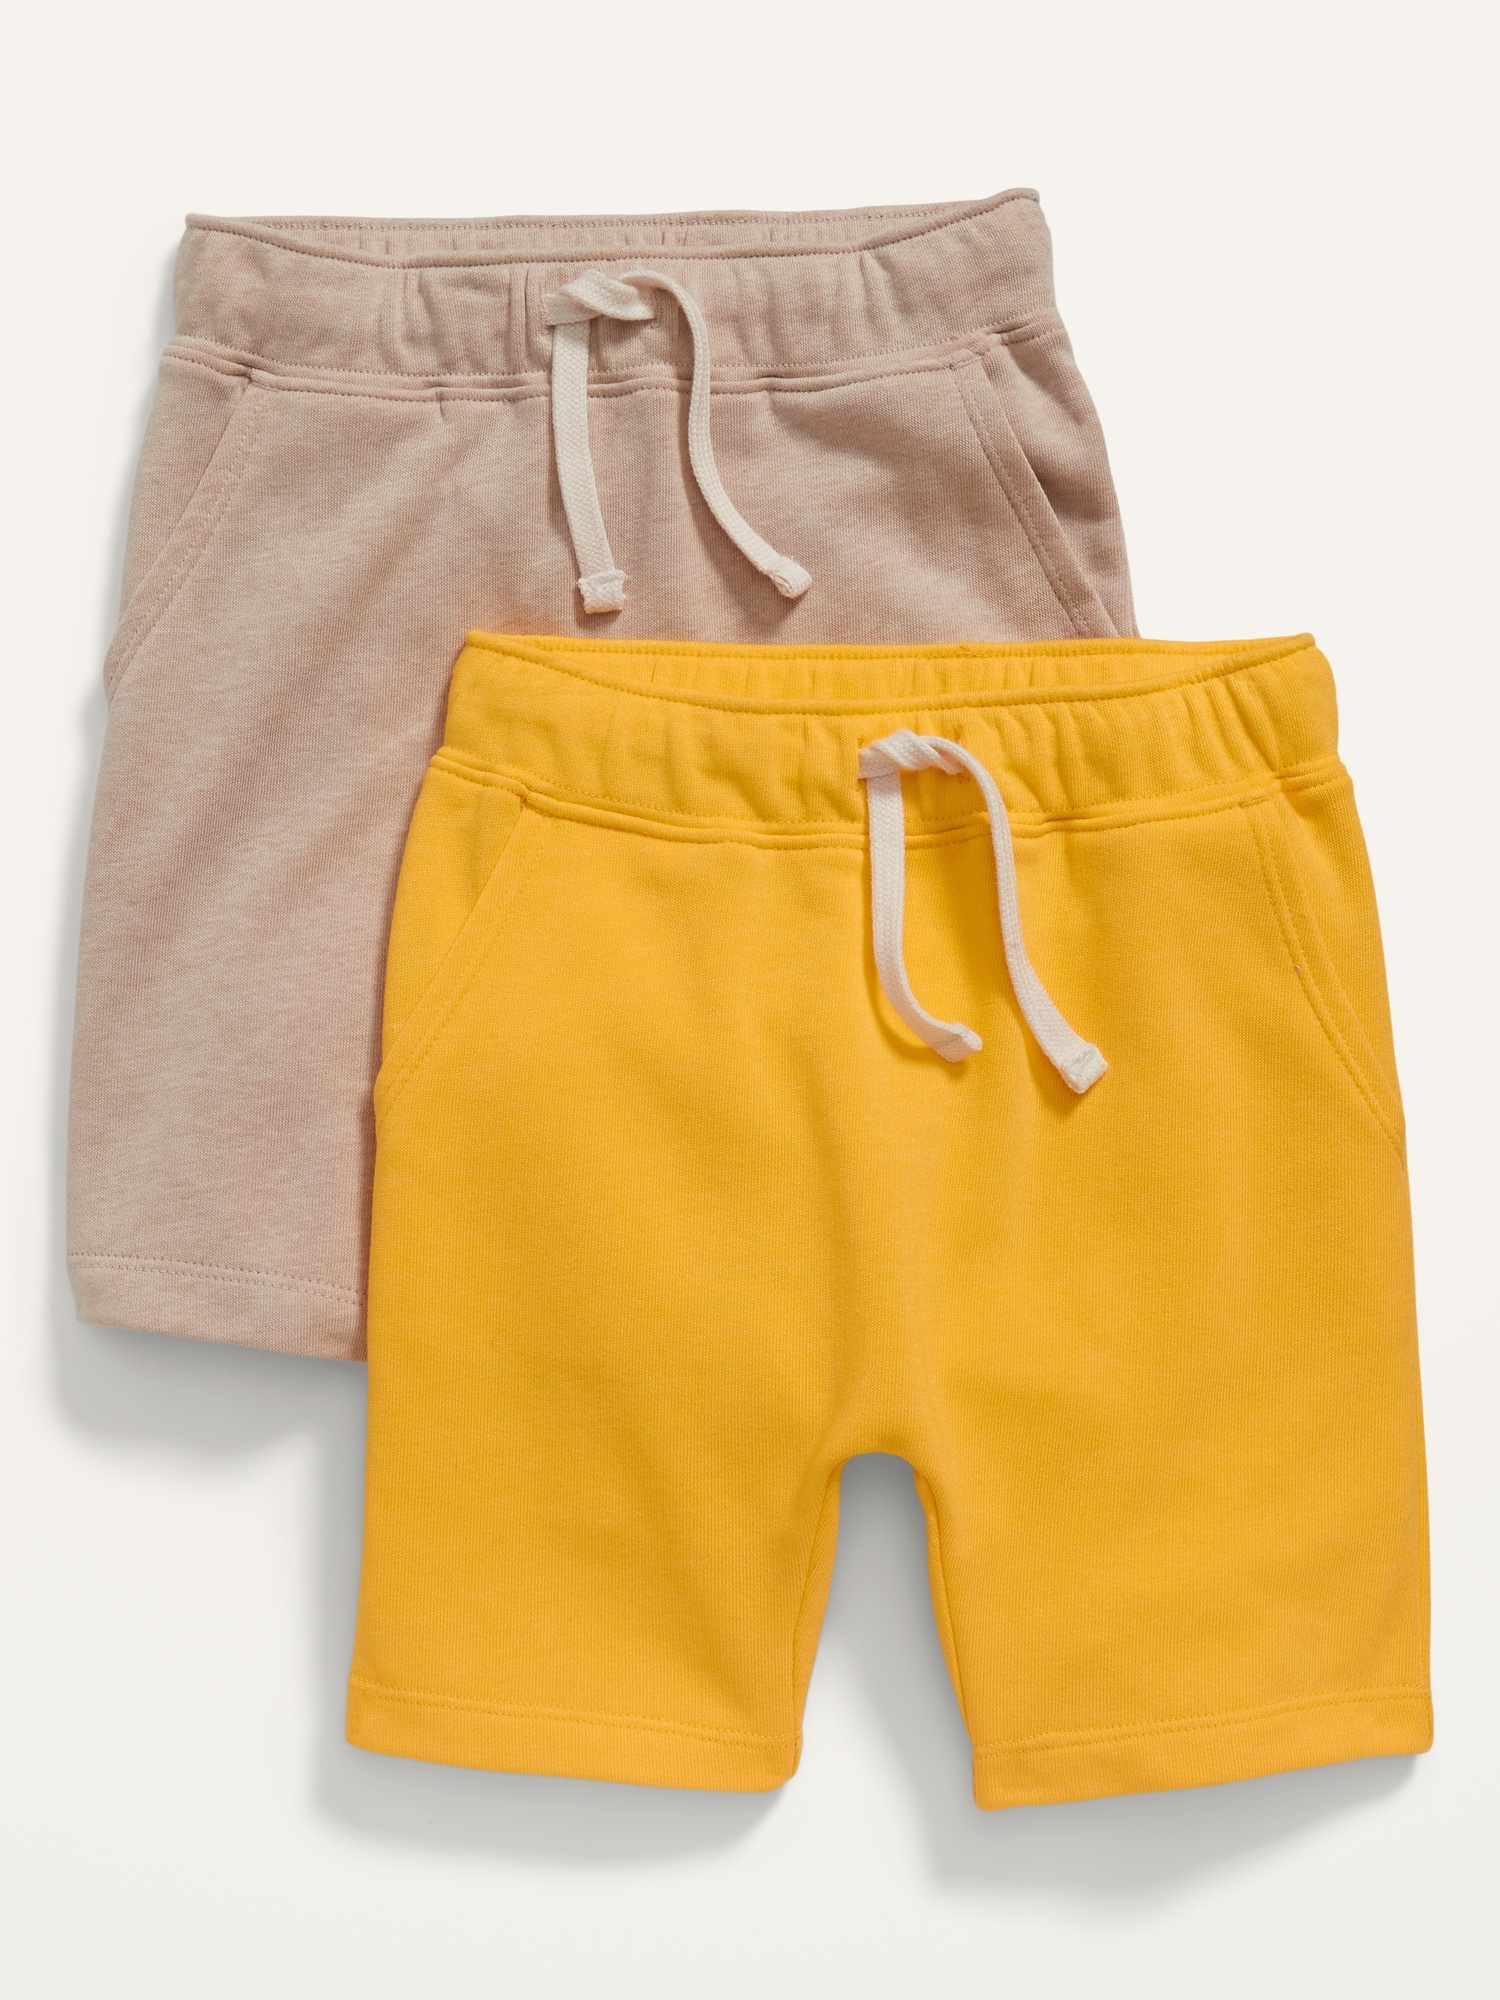 Old Navy 2-Pack Functional Drawstring U-Shaped Shorts for Toddler Boys yellow. 1